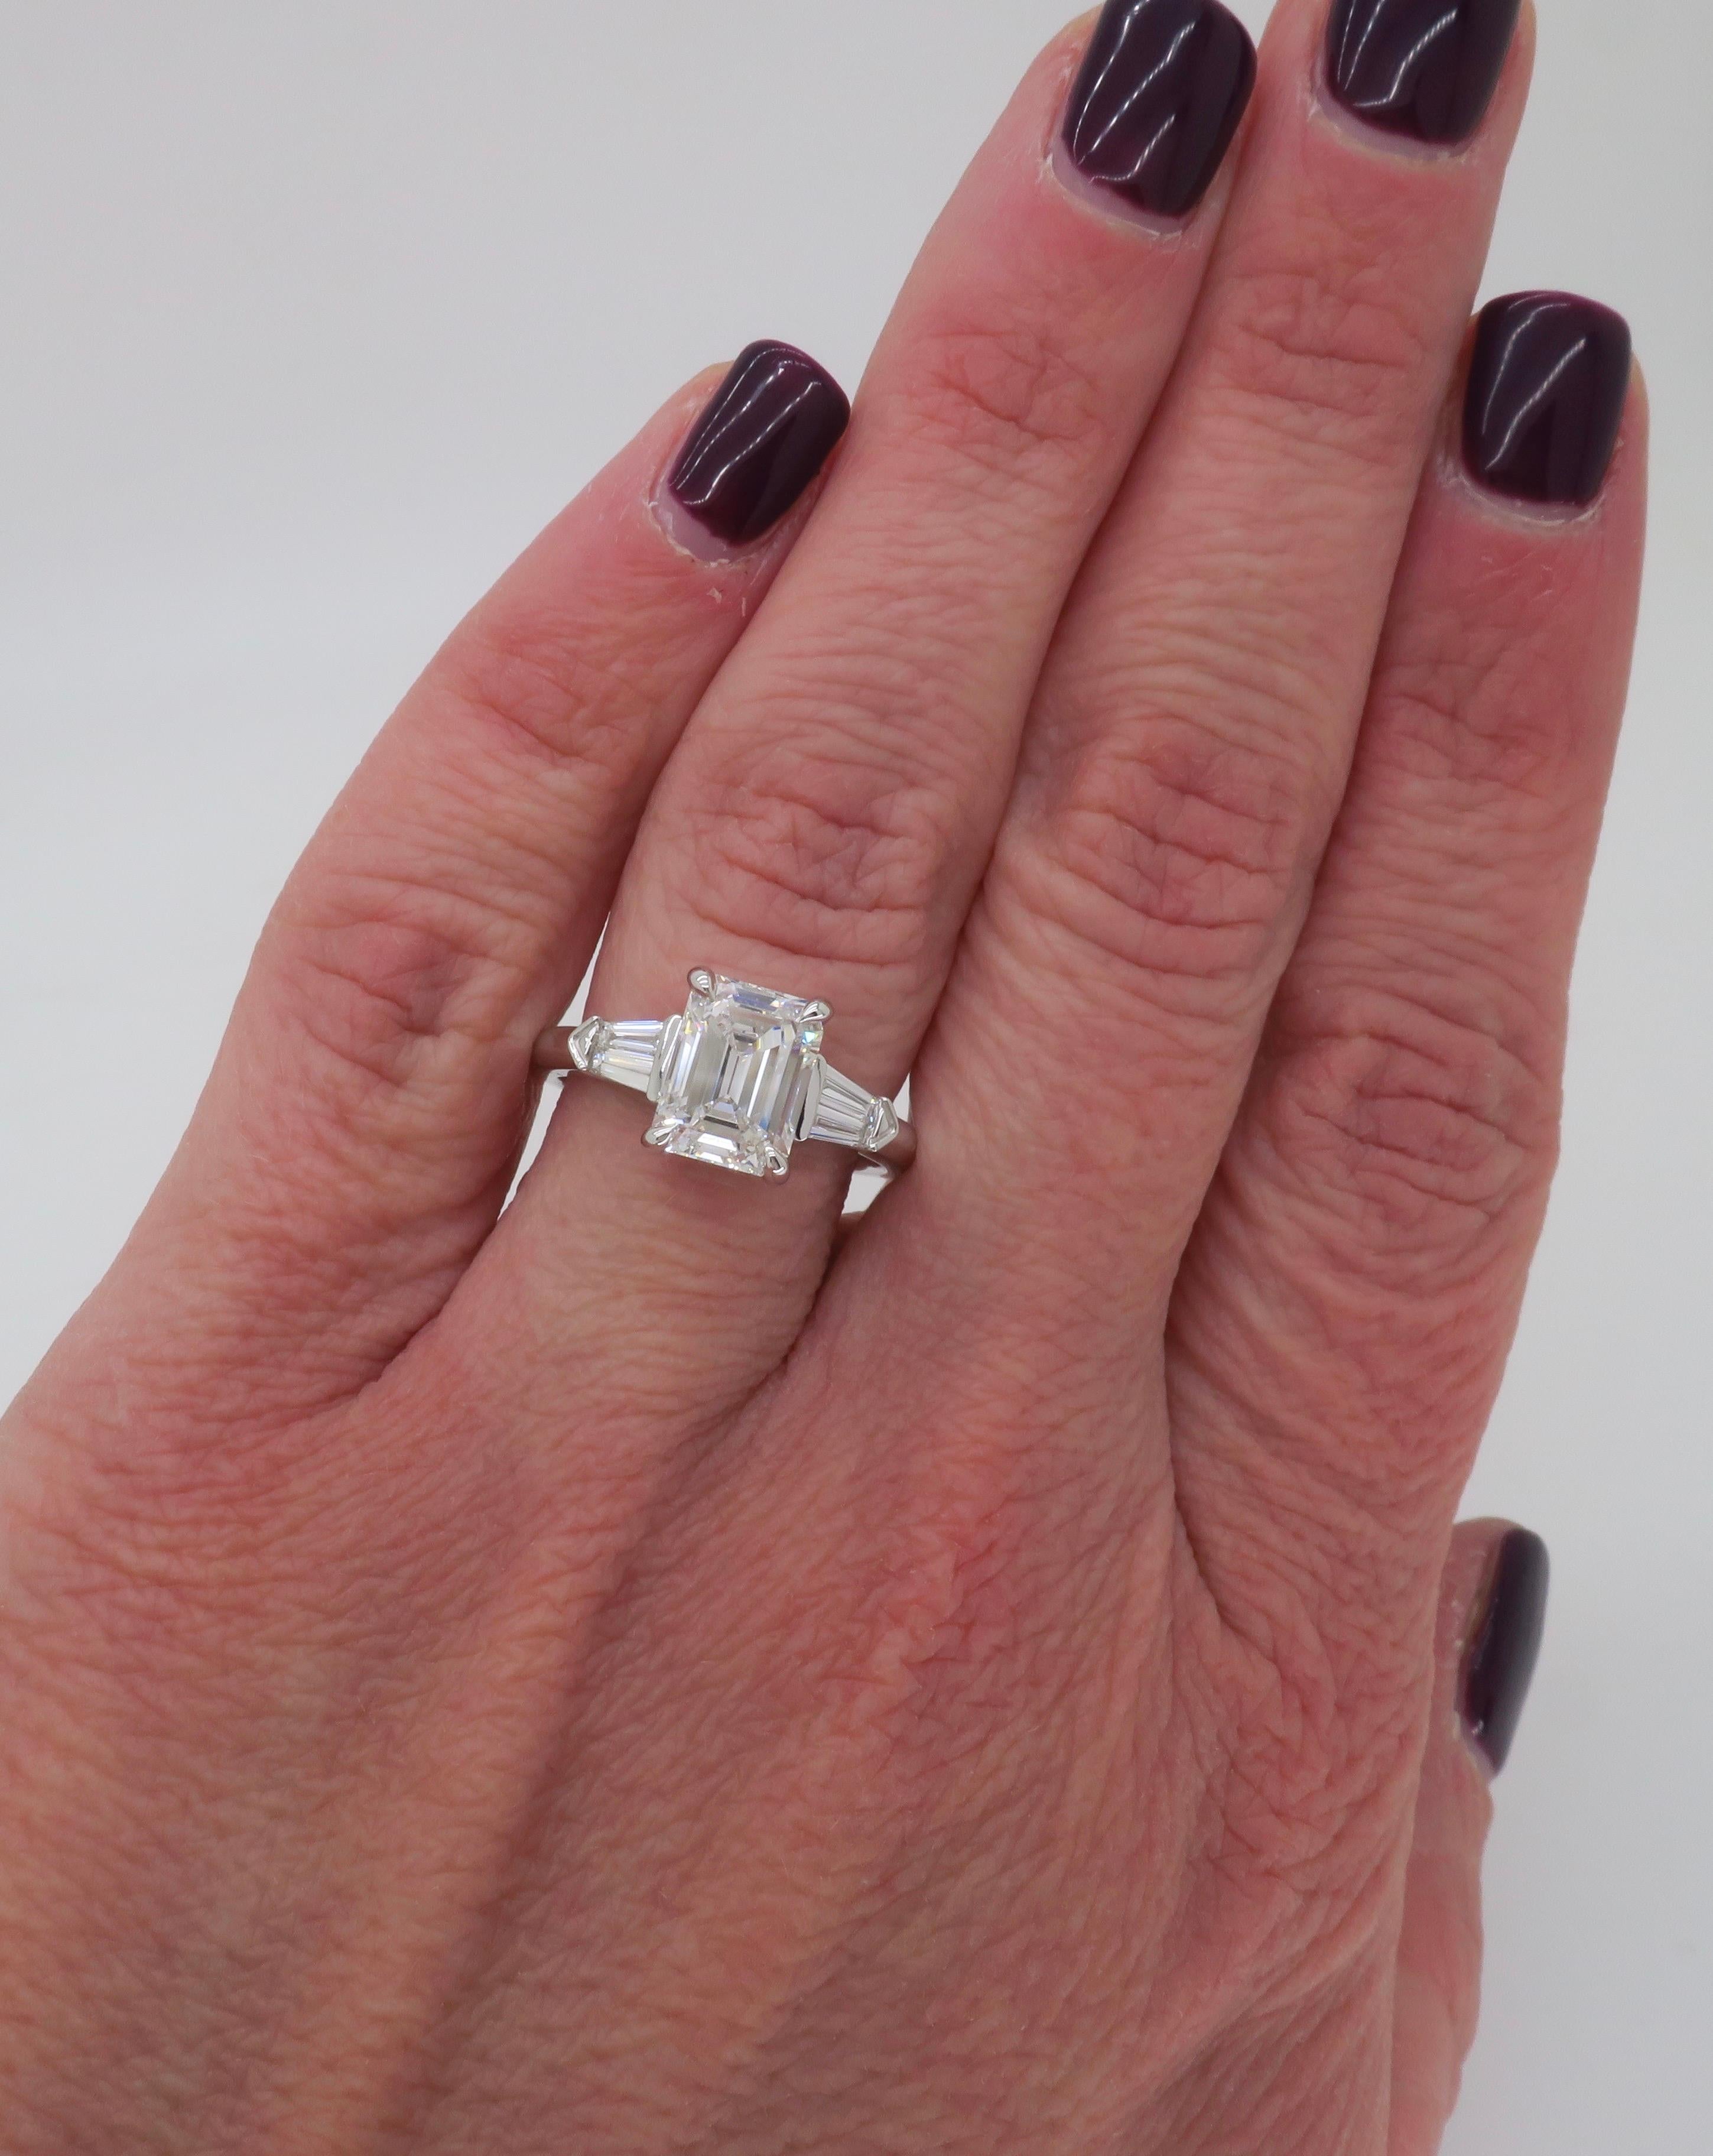 GIA Certified 2.19CTW Emerald Cut Diamond Engagement Ring For Sale 1